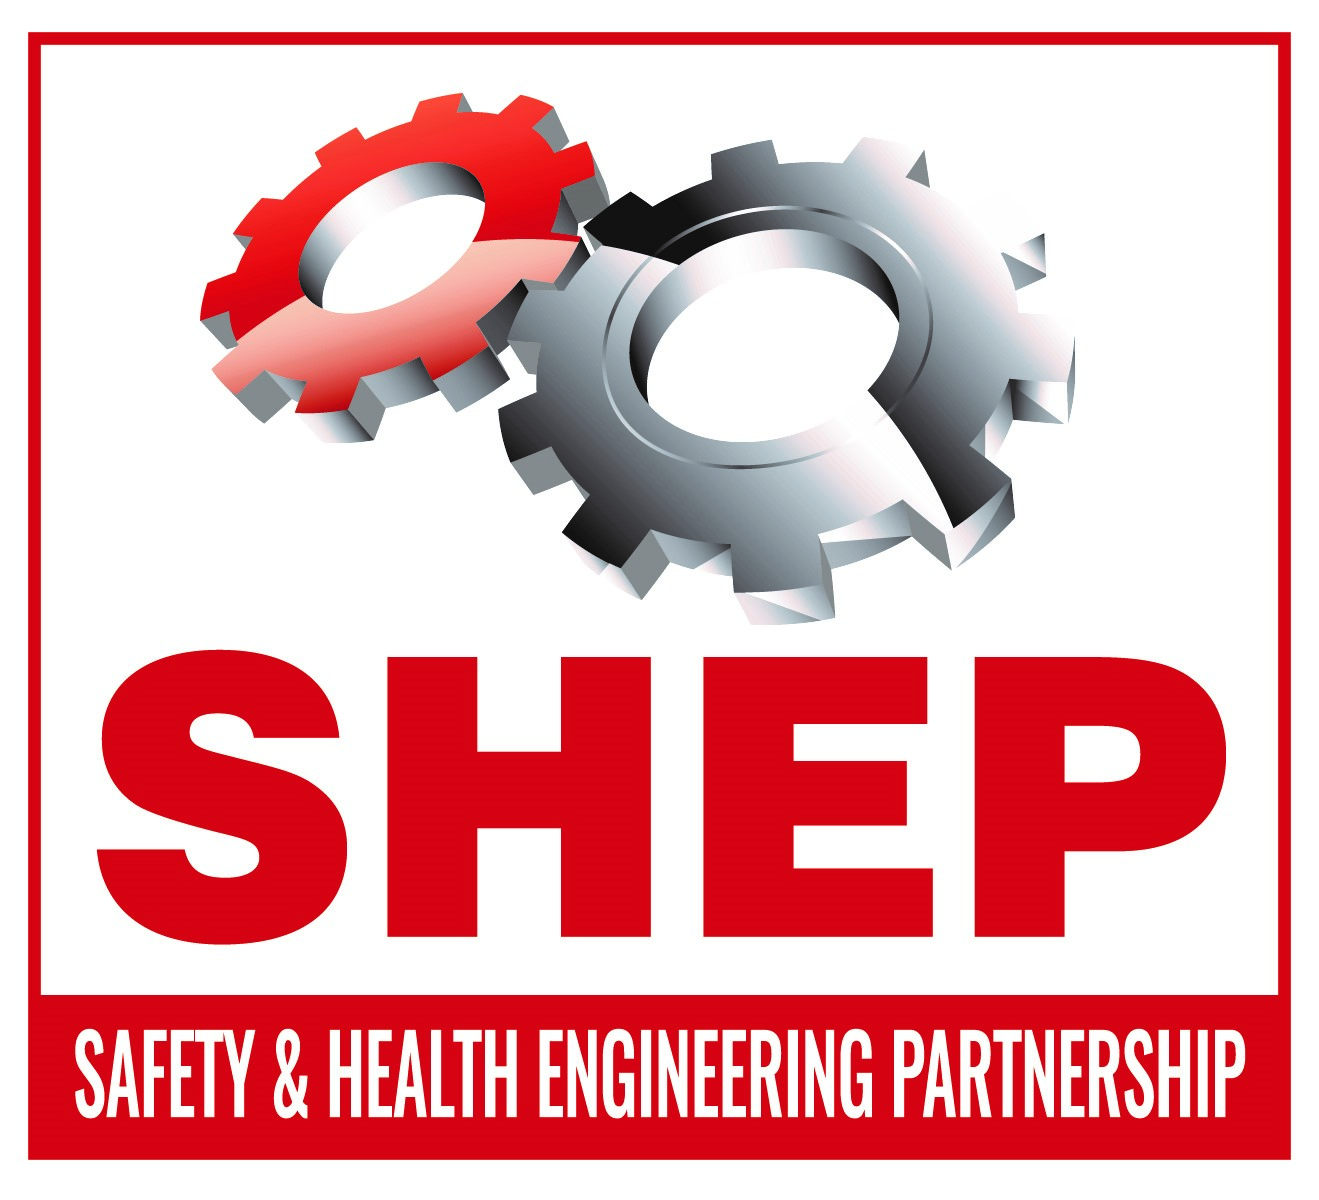 SHEP seminar aims to prepare engineering SMEs for 2020 HSE inspections